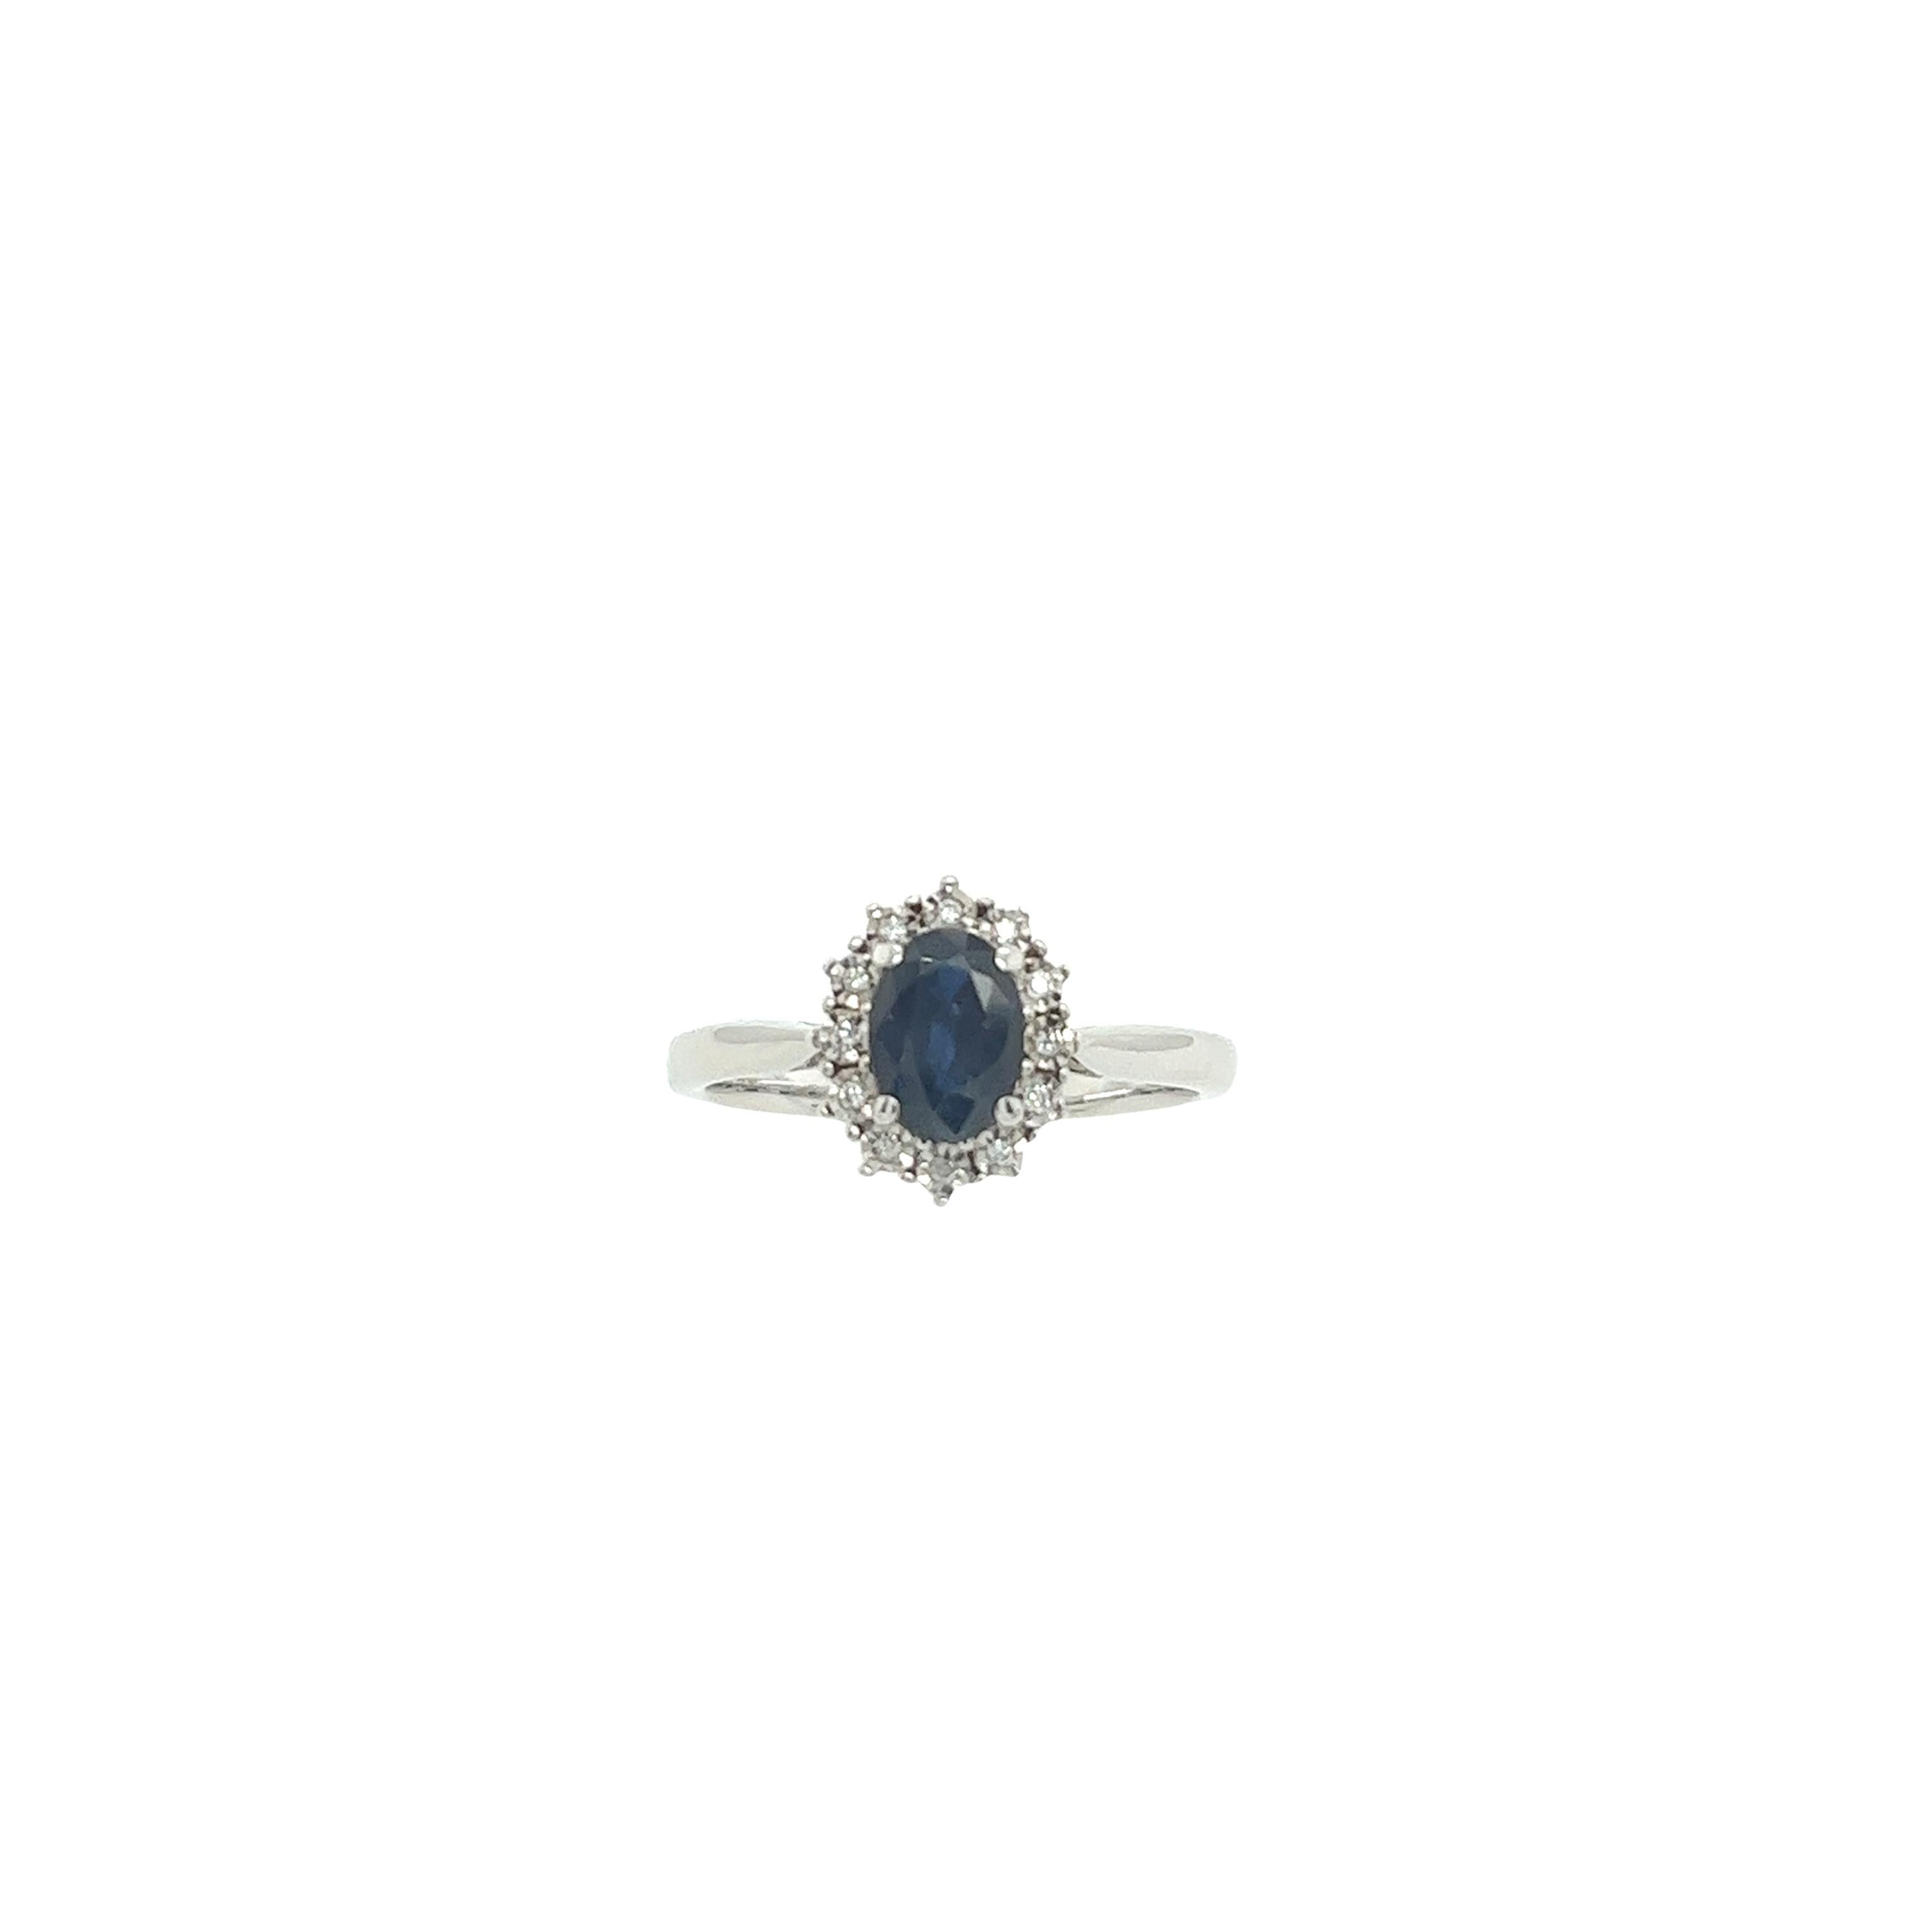 Introducing the epitome of timeless elegance - our classic oval sapphire ring surrounded by 12 dazzling diamonds, total diamond weight is 0.06ct H/SI1 set in exquisite 9ct white gold.
Total Weight: 3.2g
Ring Size: N
Width of Band: 1.88mm
Width of